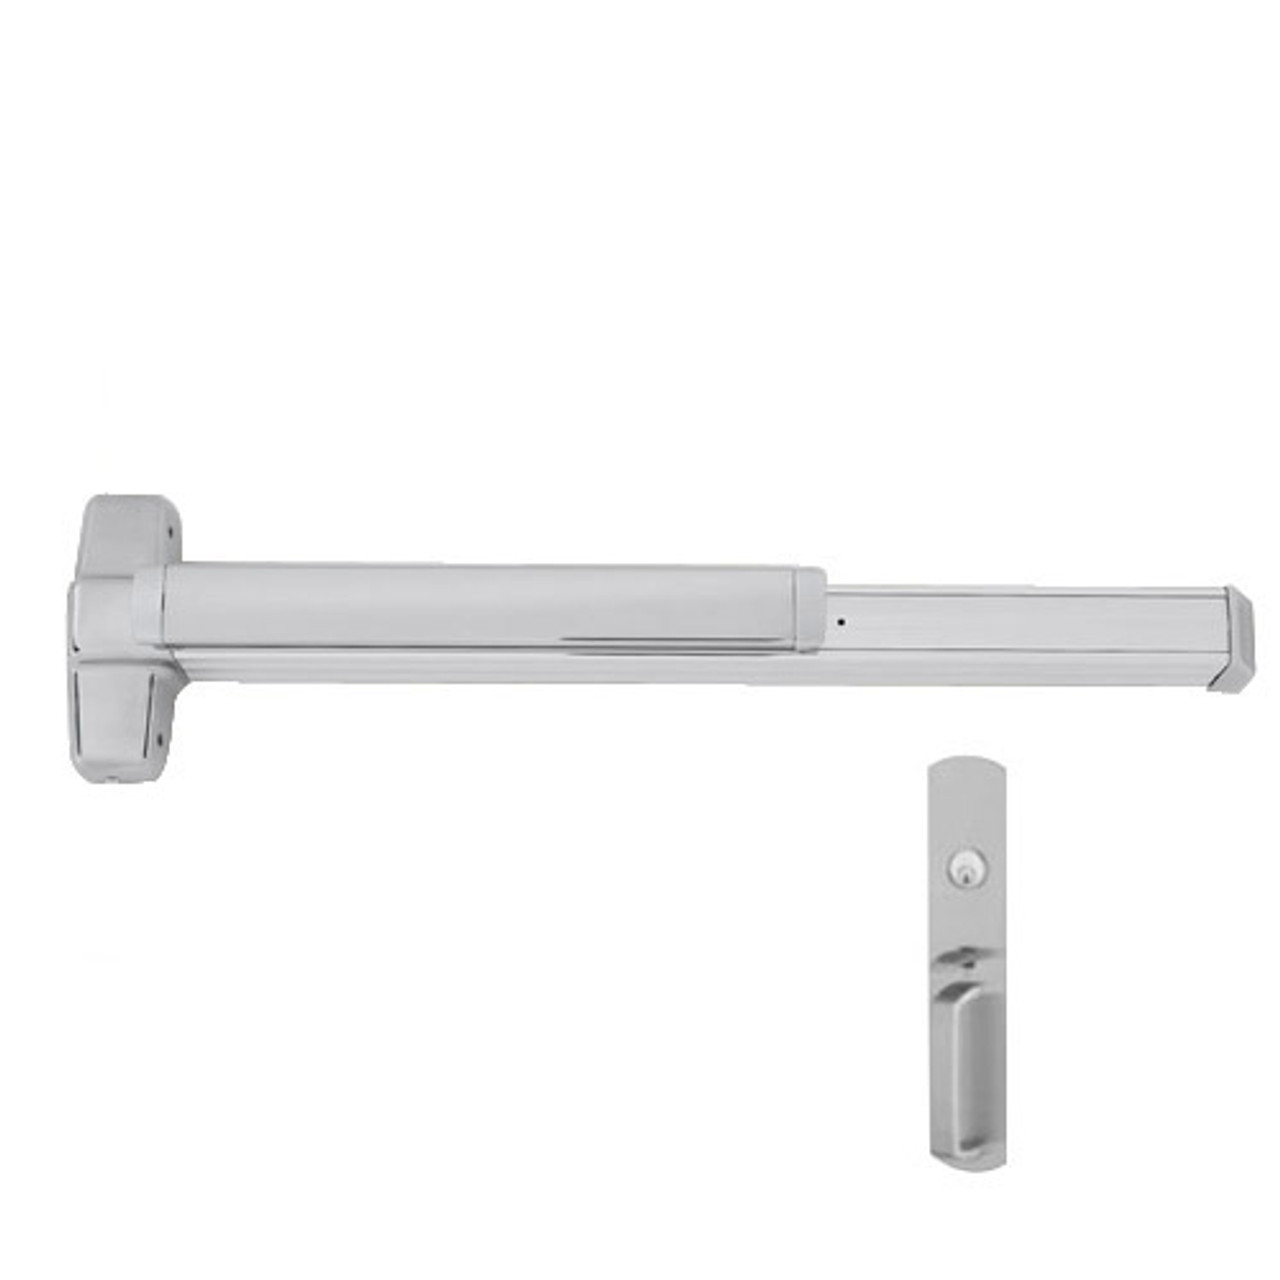 QEL9847WDC-TP-US32D-3 Von Duprin Exit Device with Quiet Electric Latch in Satin Stainless